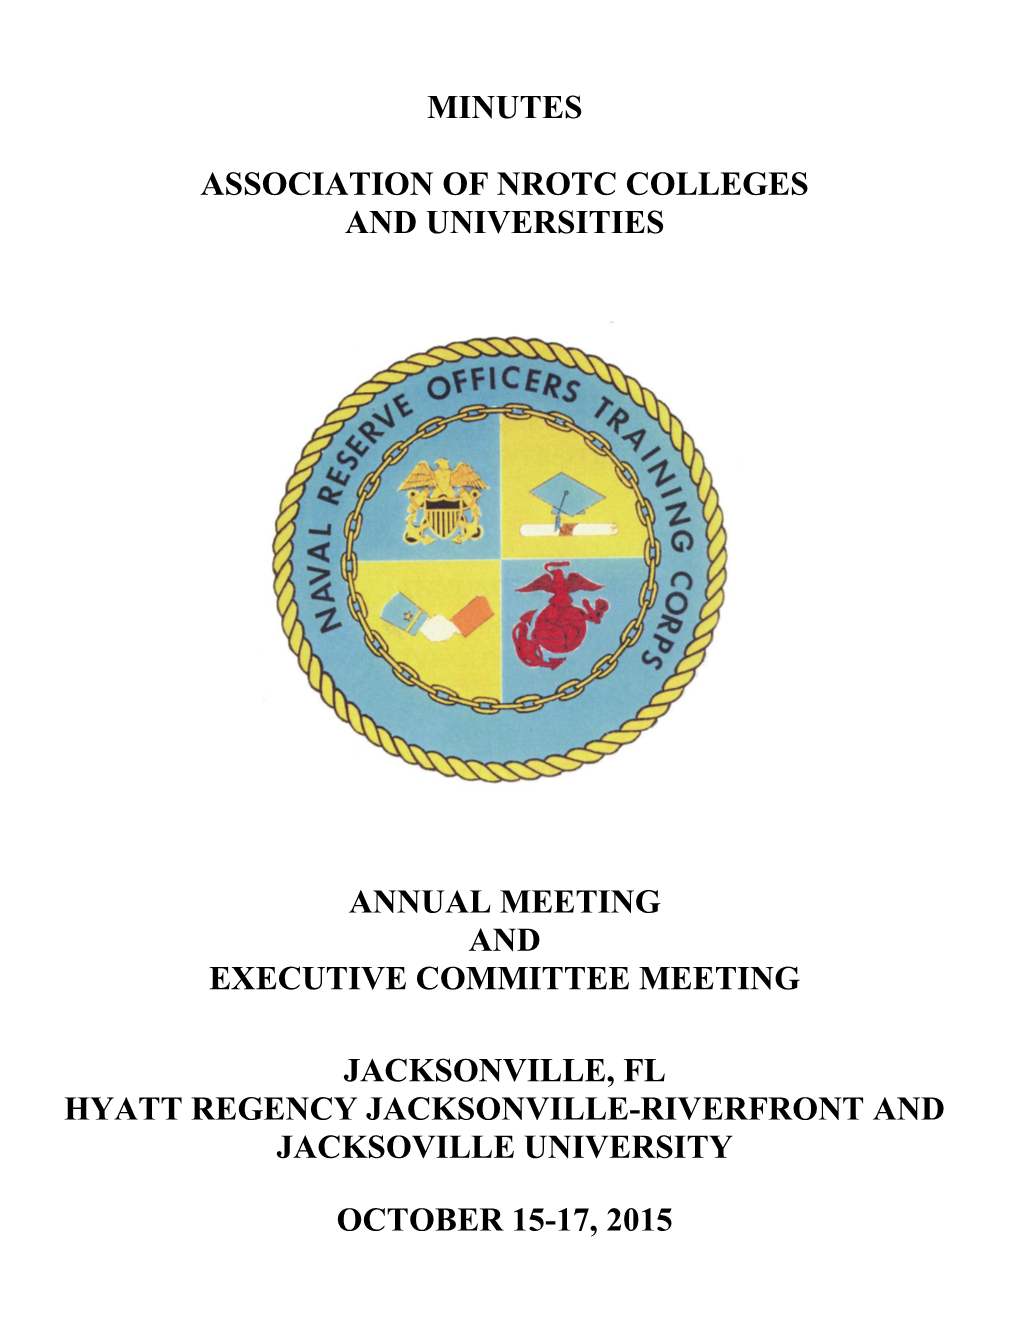 MINUTES Association of NROTC Colleges and Universities OCTOBER 15-17, 2015 Jacksonville, Florida